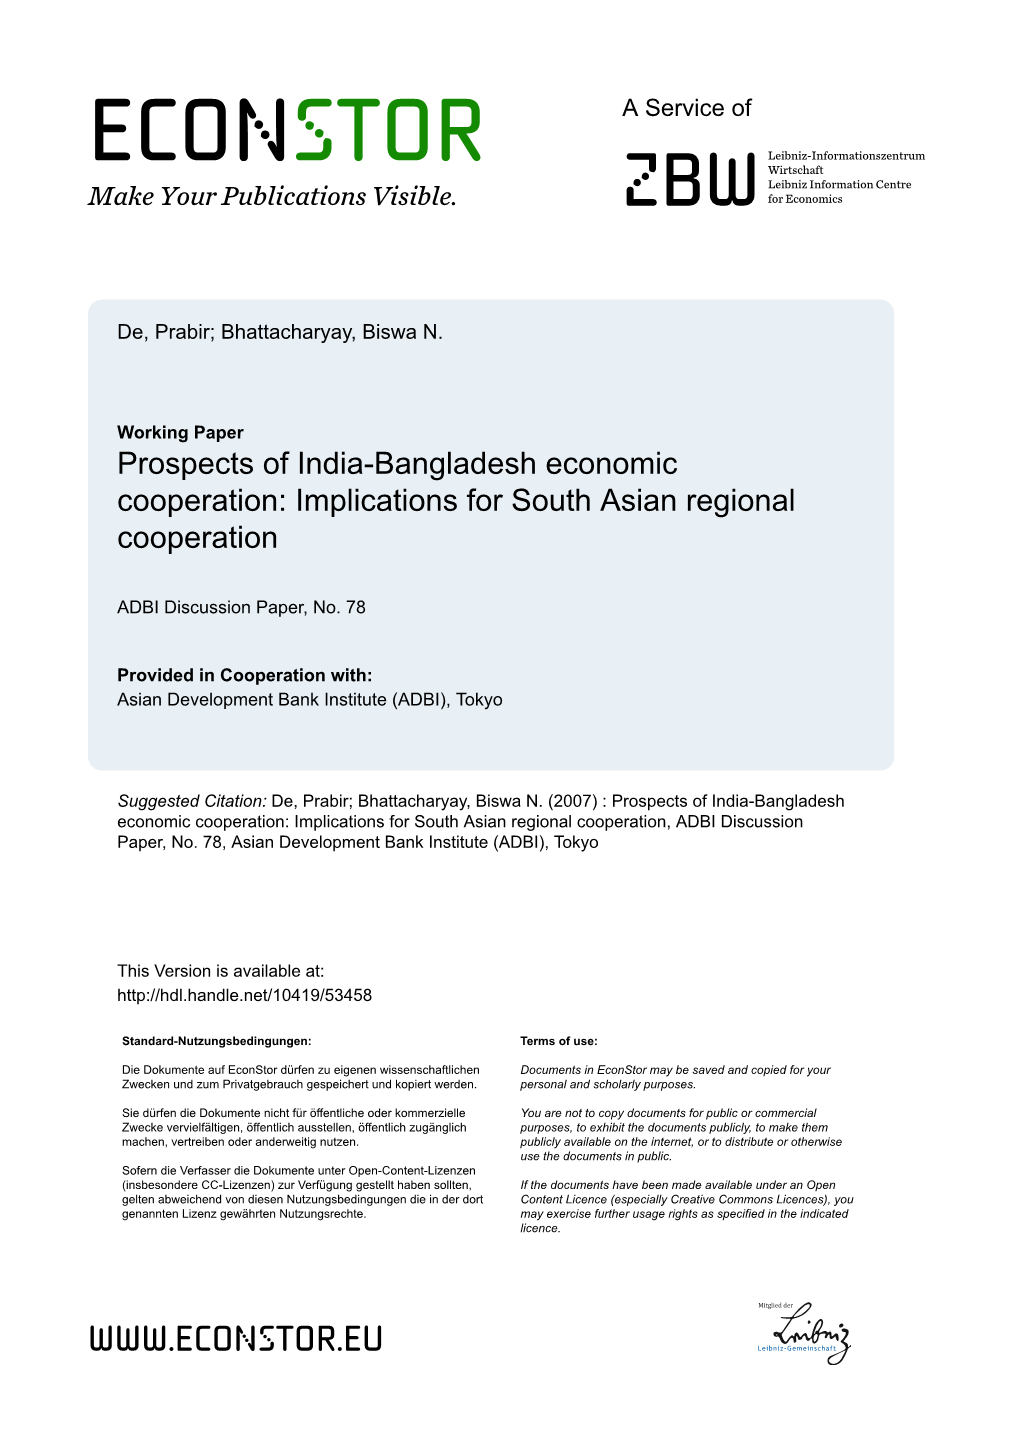 Implications for South Asian Regional Cooperation